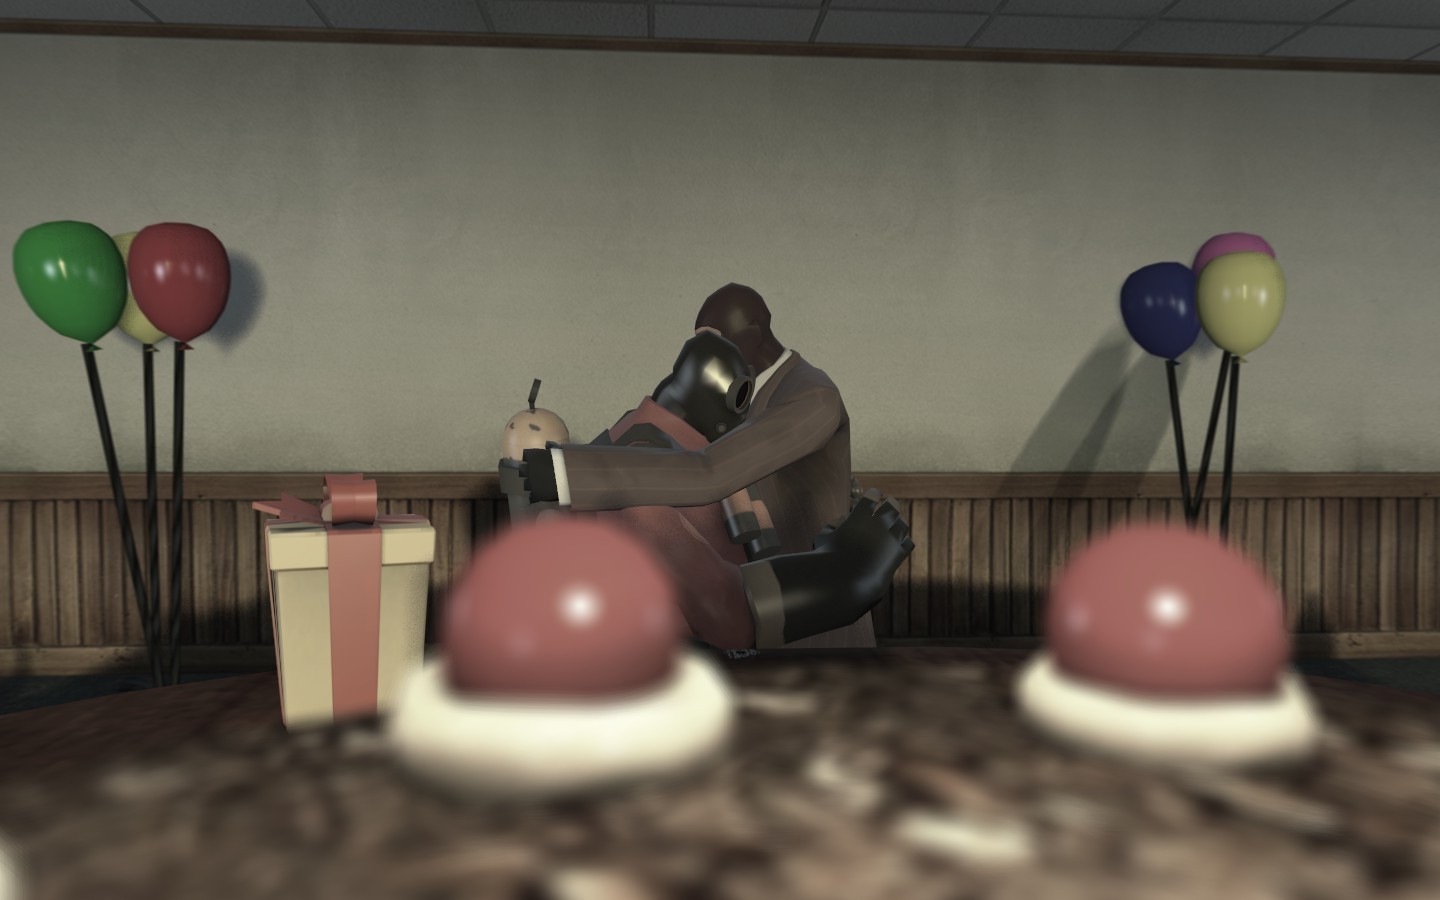 video Games, Team Fortress 2, Spy (character), Pyro (character), Birth Wallpaper